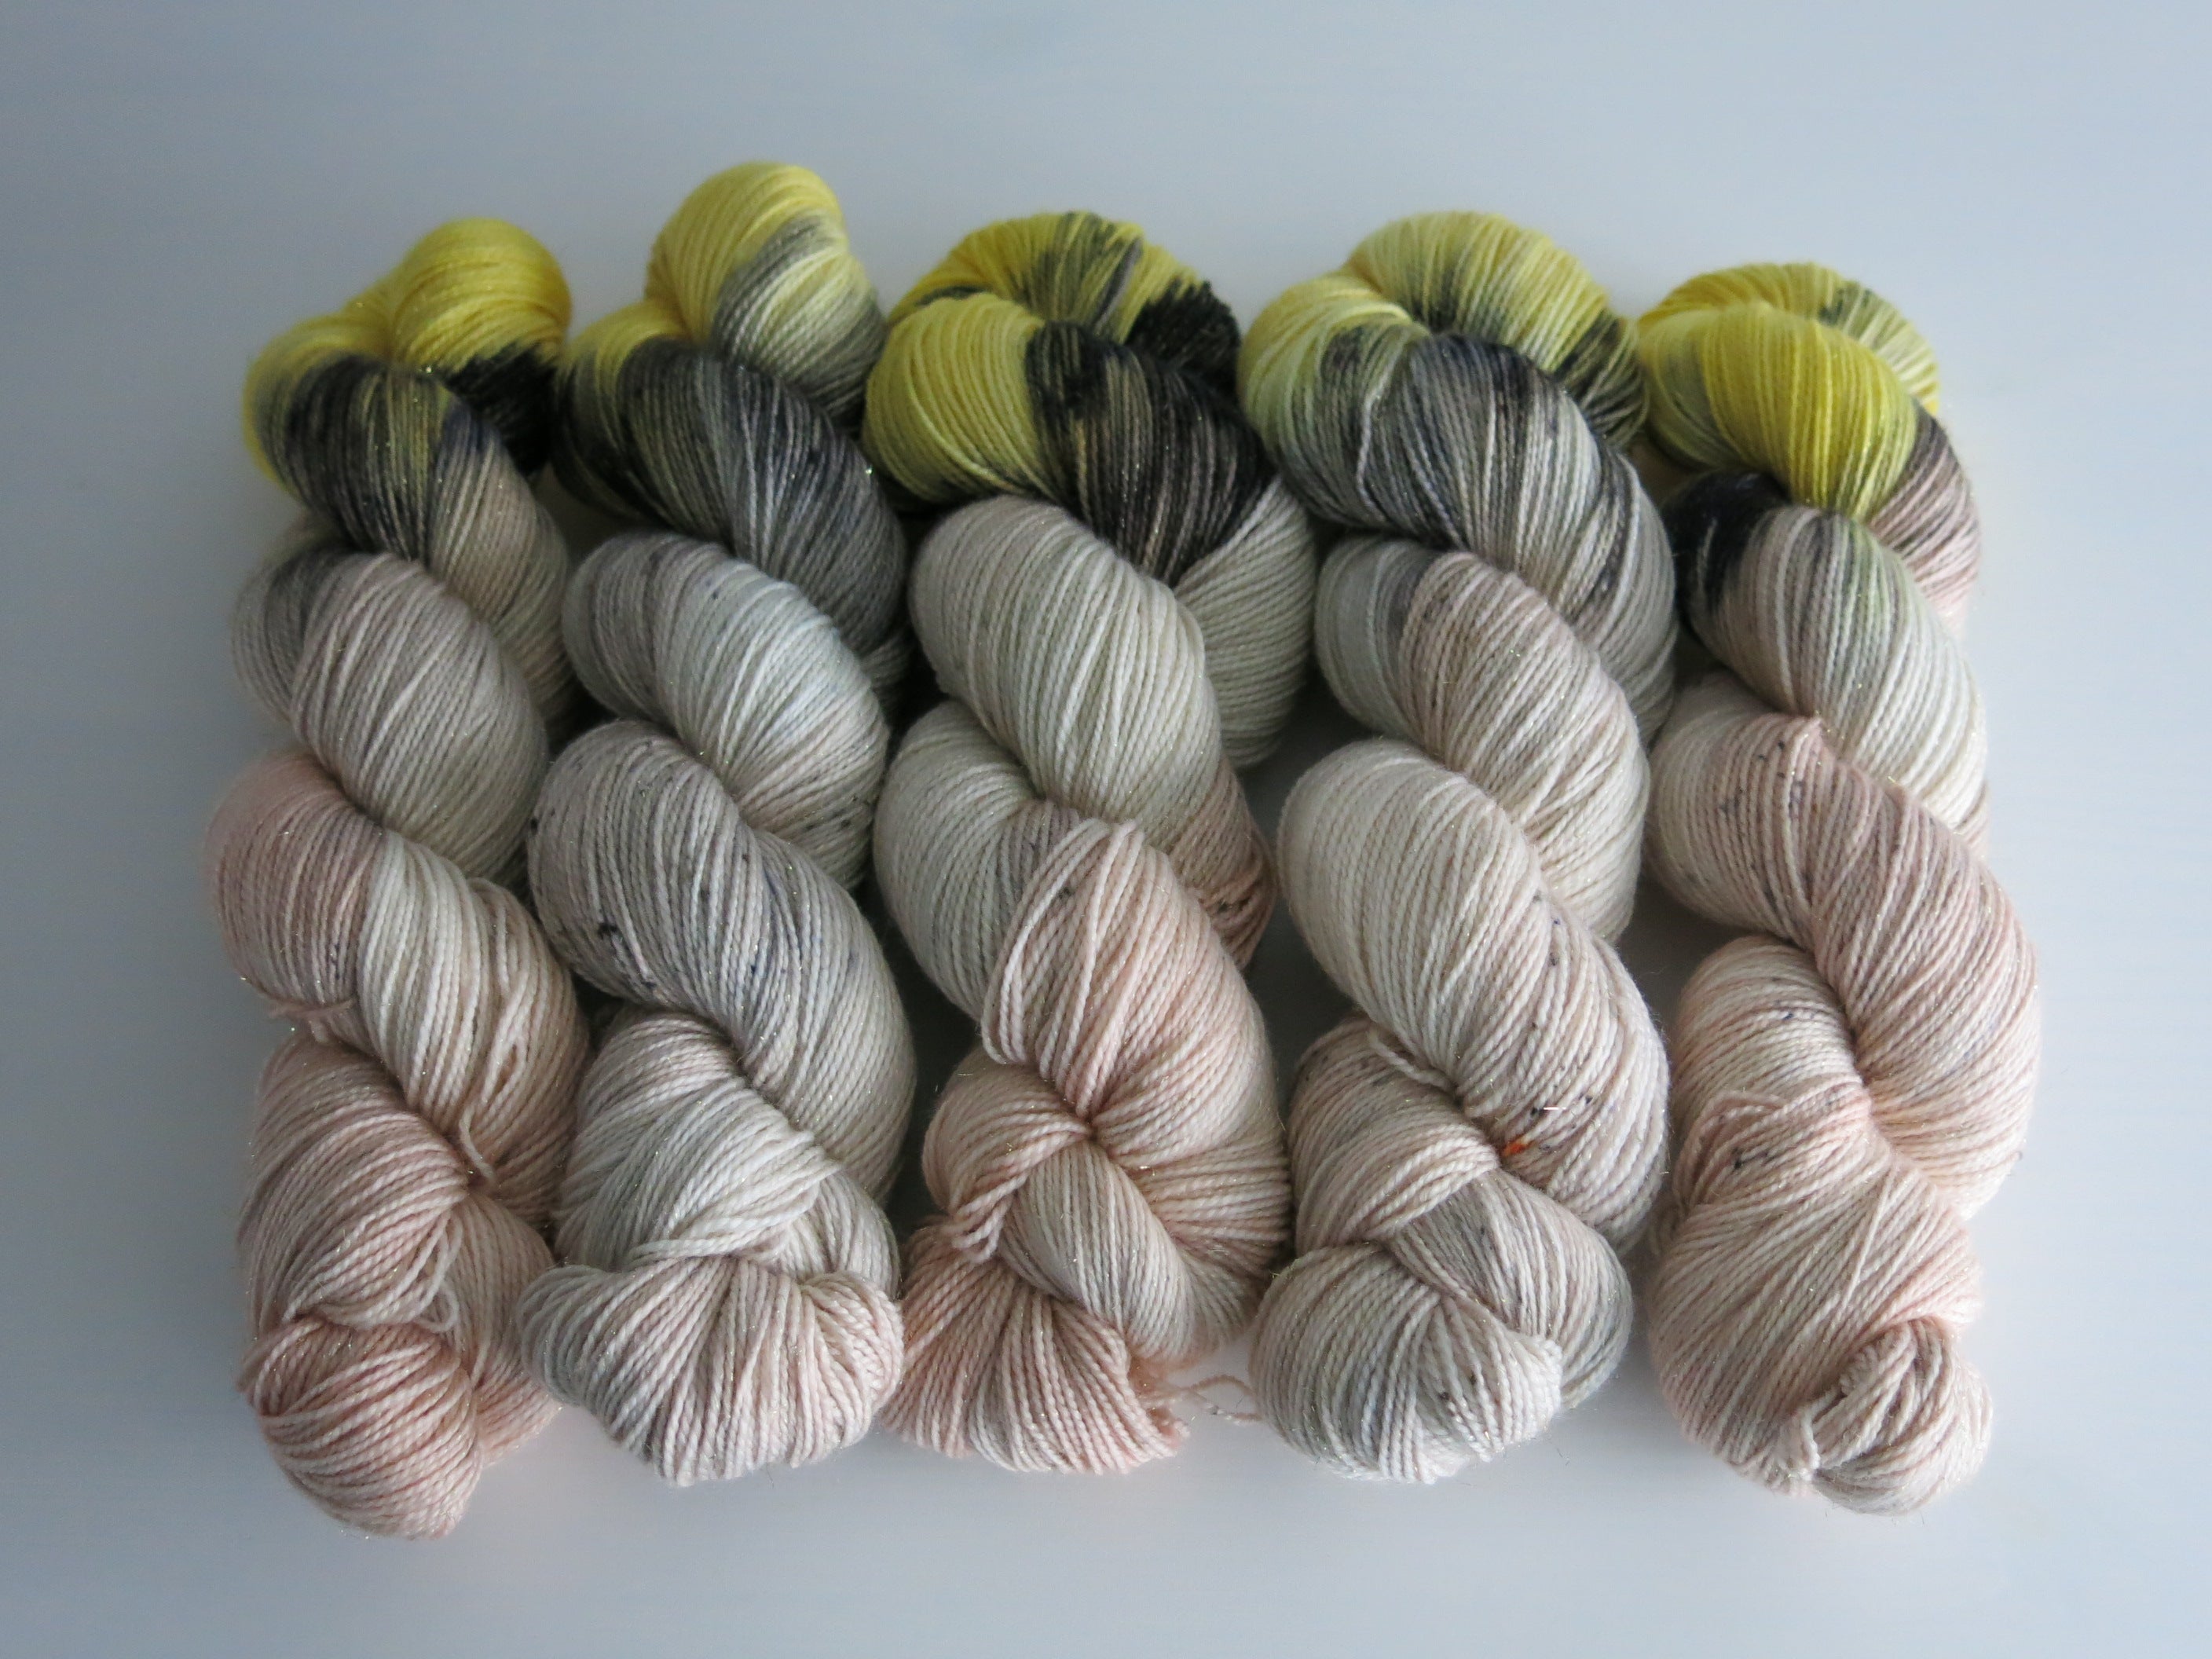 indie dyed yarn inspired by a christmas story